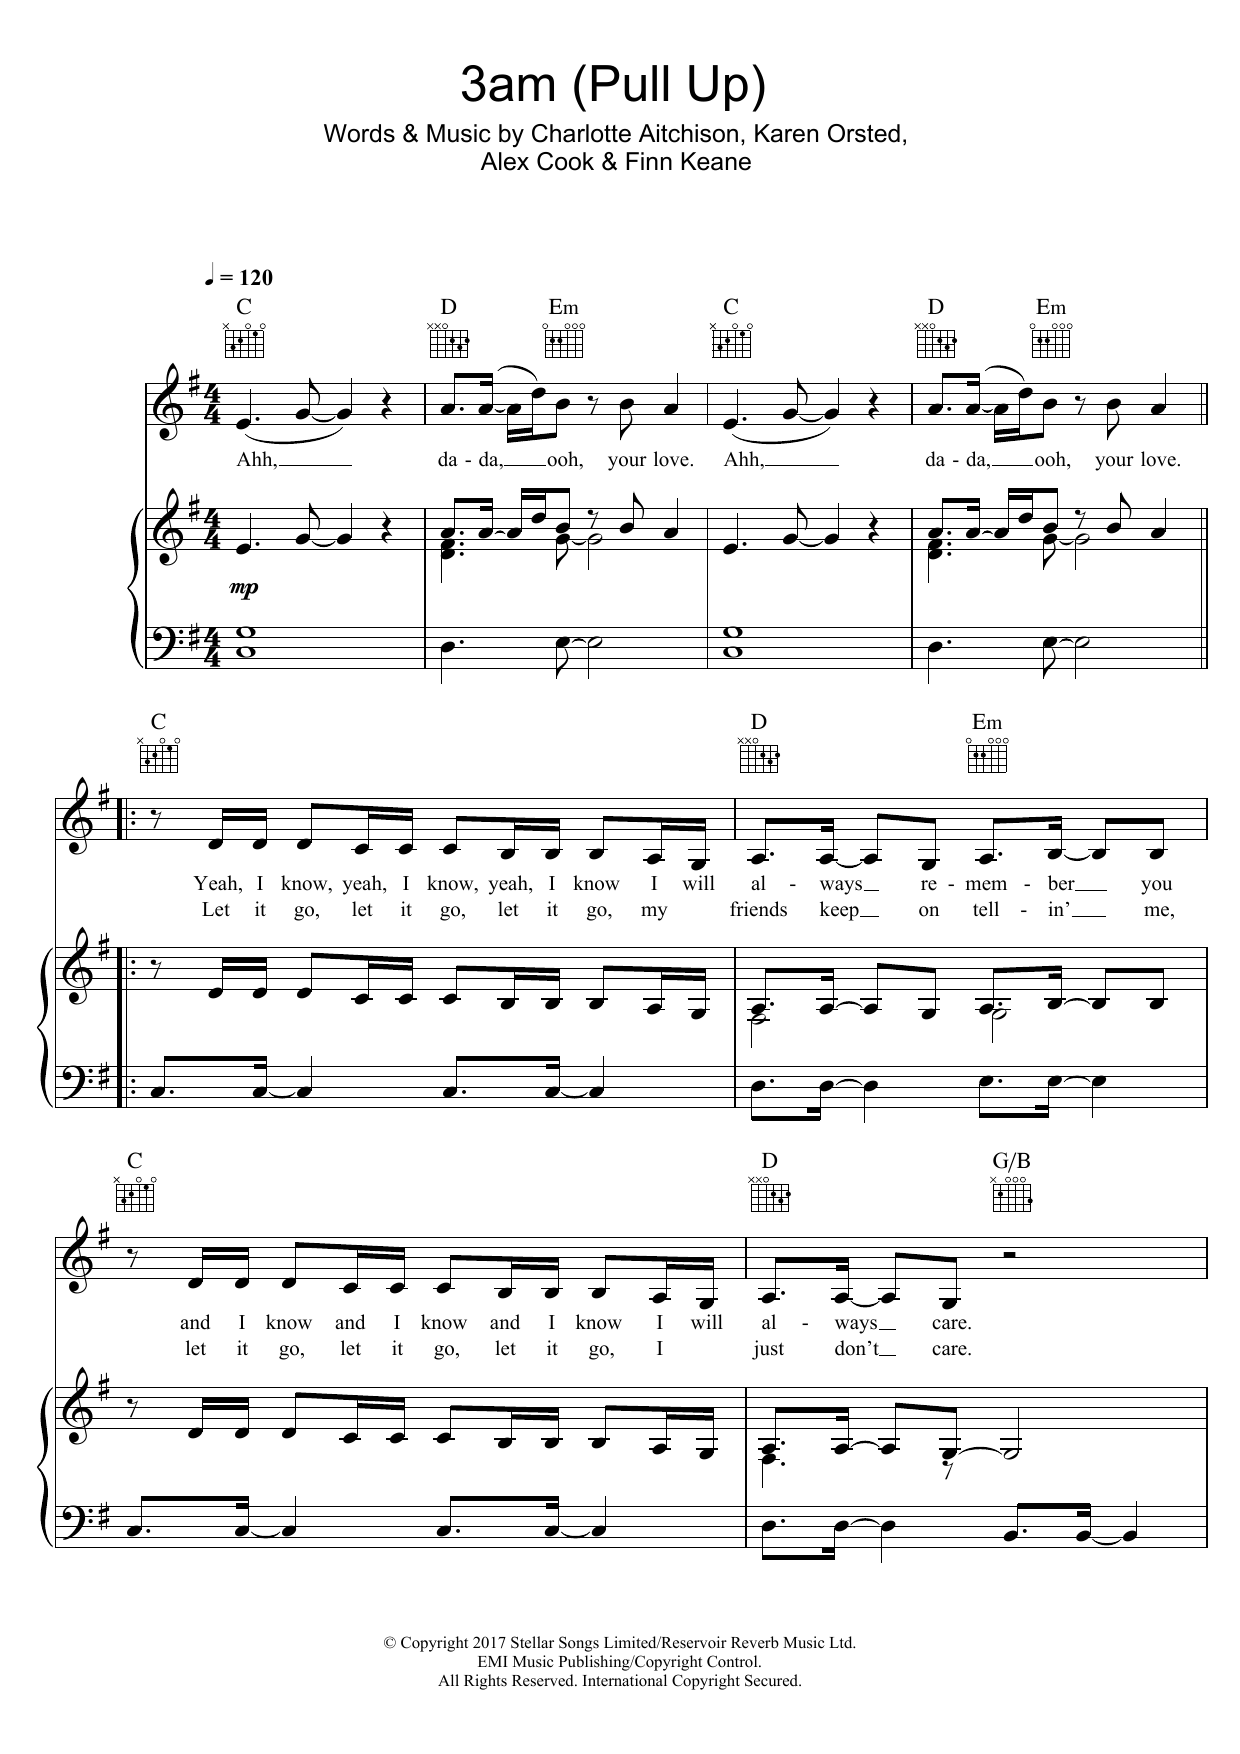 Download Charli XCX 3am (Pull Up) (feat. MØ) Sheet Music